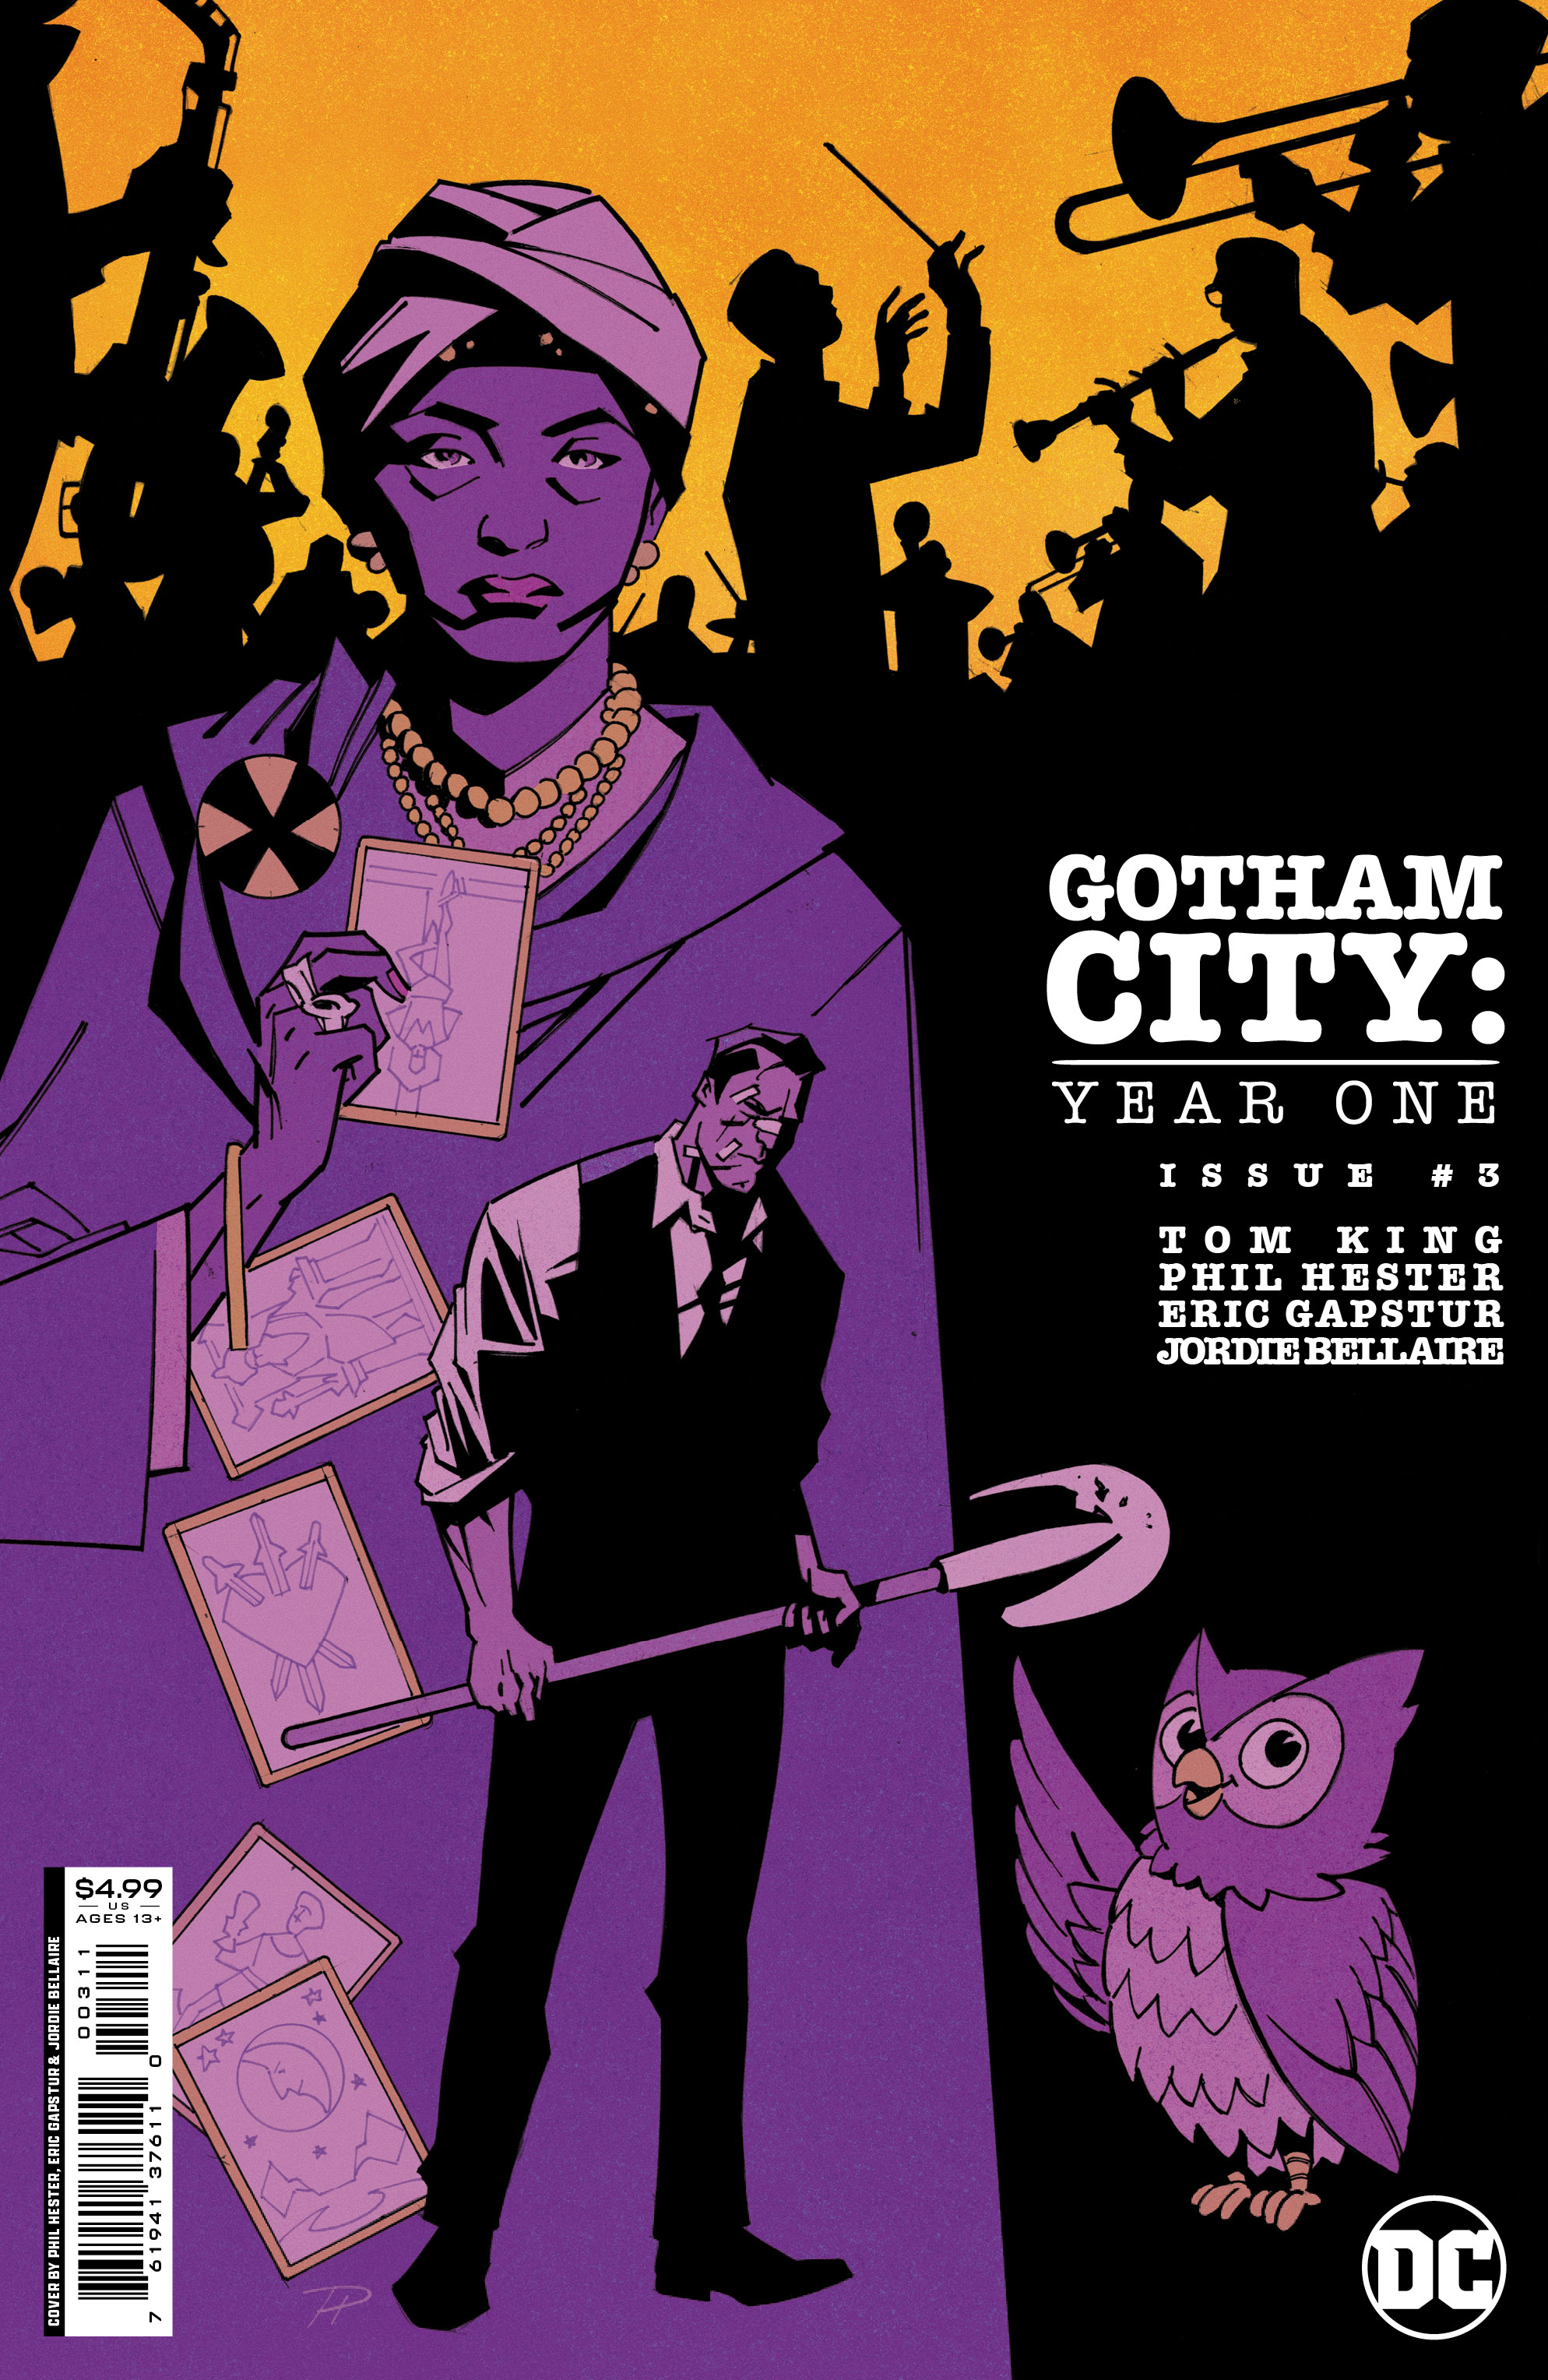 Gotham City Year One #3 Cover A Phil Hester & Eric Gapstur (Of 6)